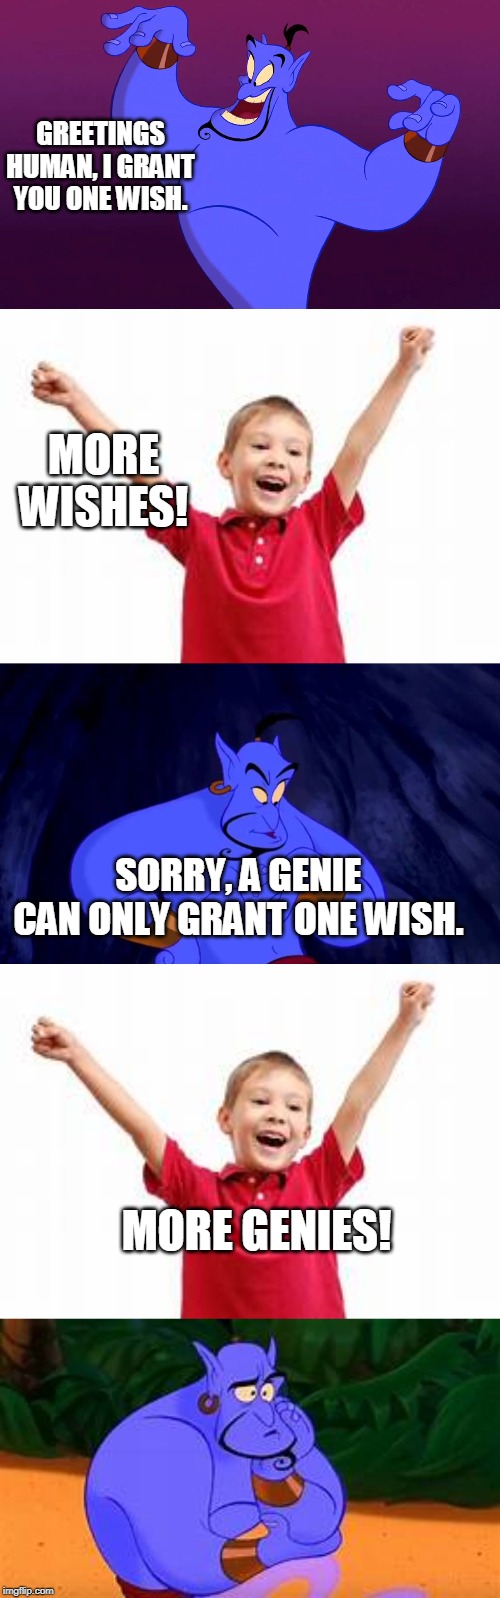 Well, he got what he wished for | GREETINGS HUMAN, I GRANT YOU ONE WISH. MORE WISHES! SORRY, A GENIE CAN ONLY GRANT ONE WISH. MORE GENIES! | image tagged in smart guy,genie | made w/ Imgflip meme maker